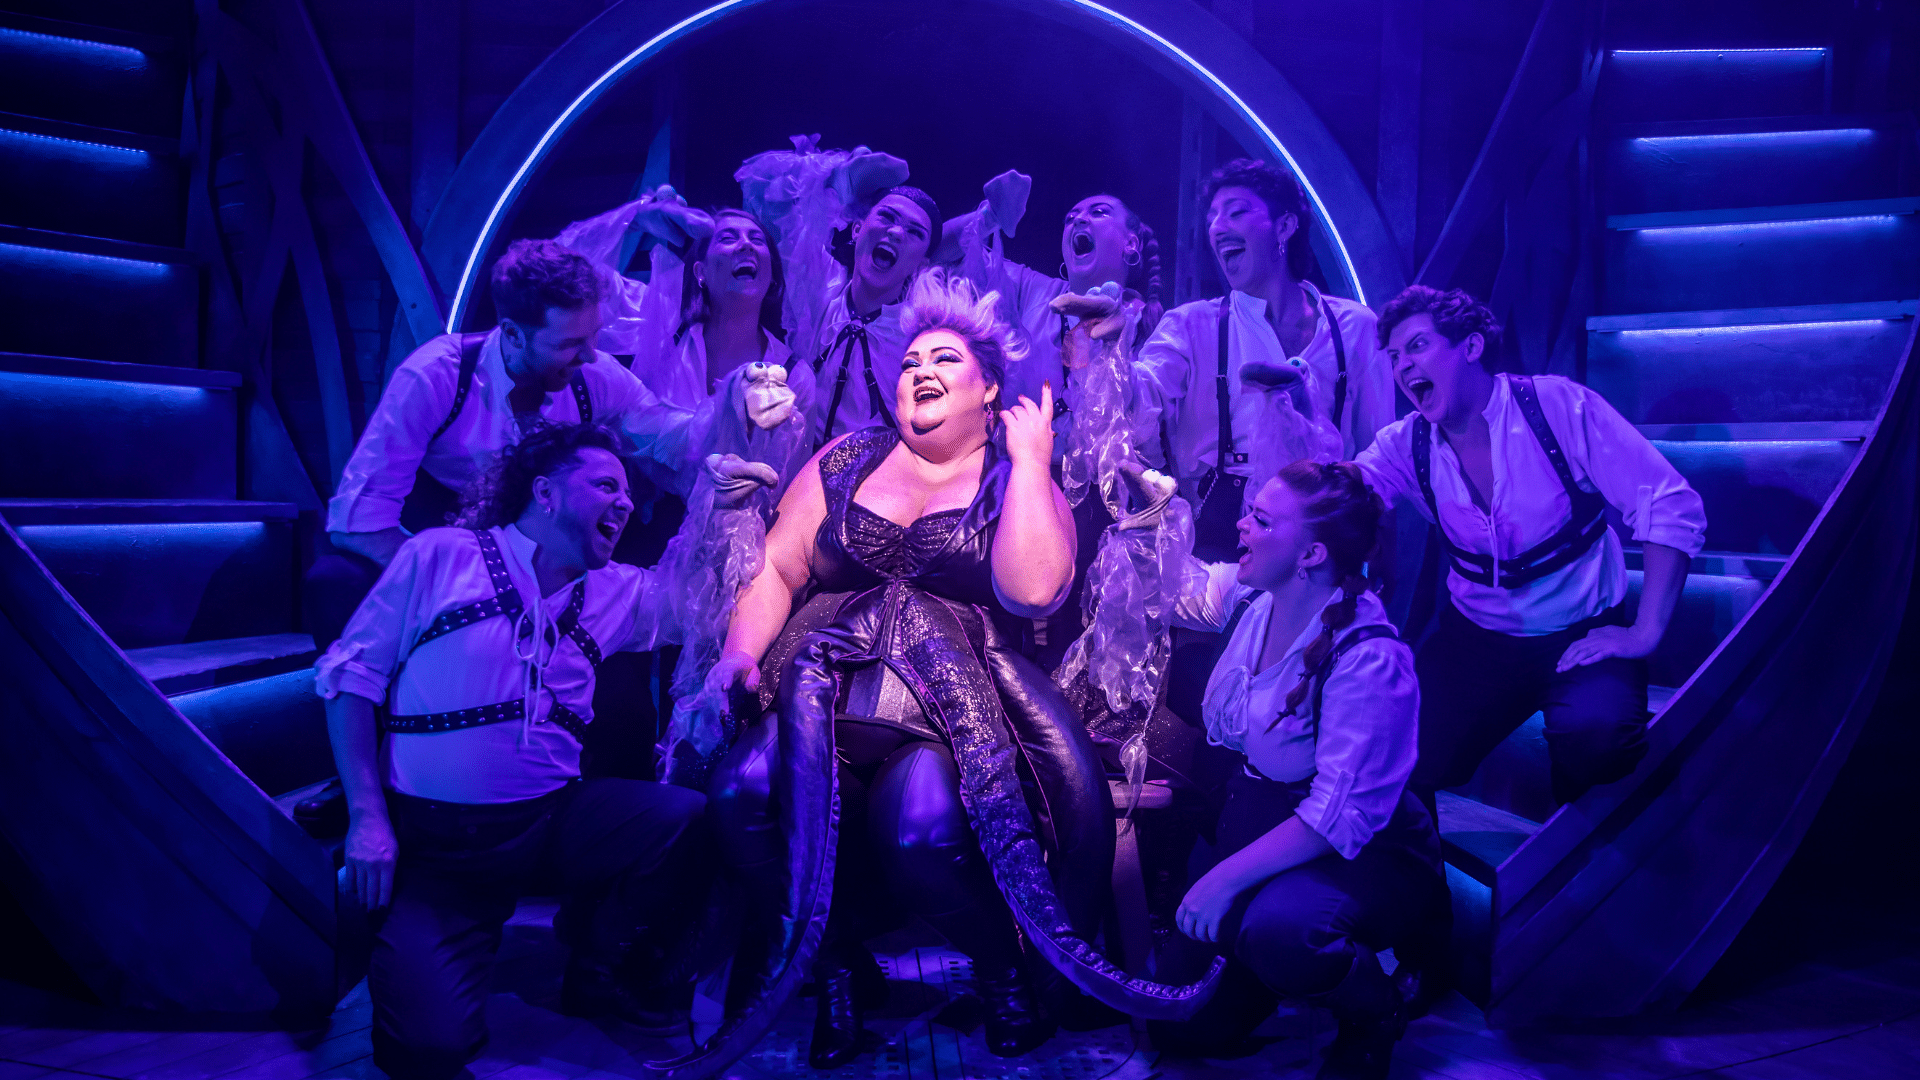 Unfortunate Production Photo. Ursula sits in a pink spotlight wearing a scaly, black bustier with tentacles attached. She is surrounded by other performers in white shirts and black leather harness. All are singing.